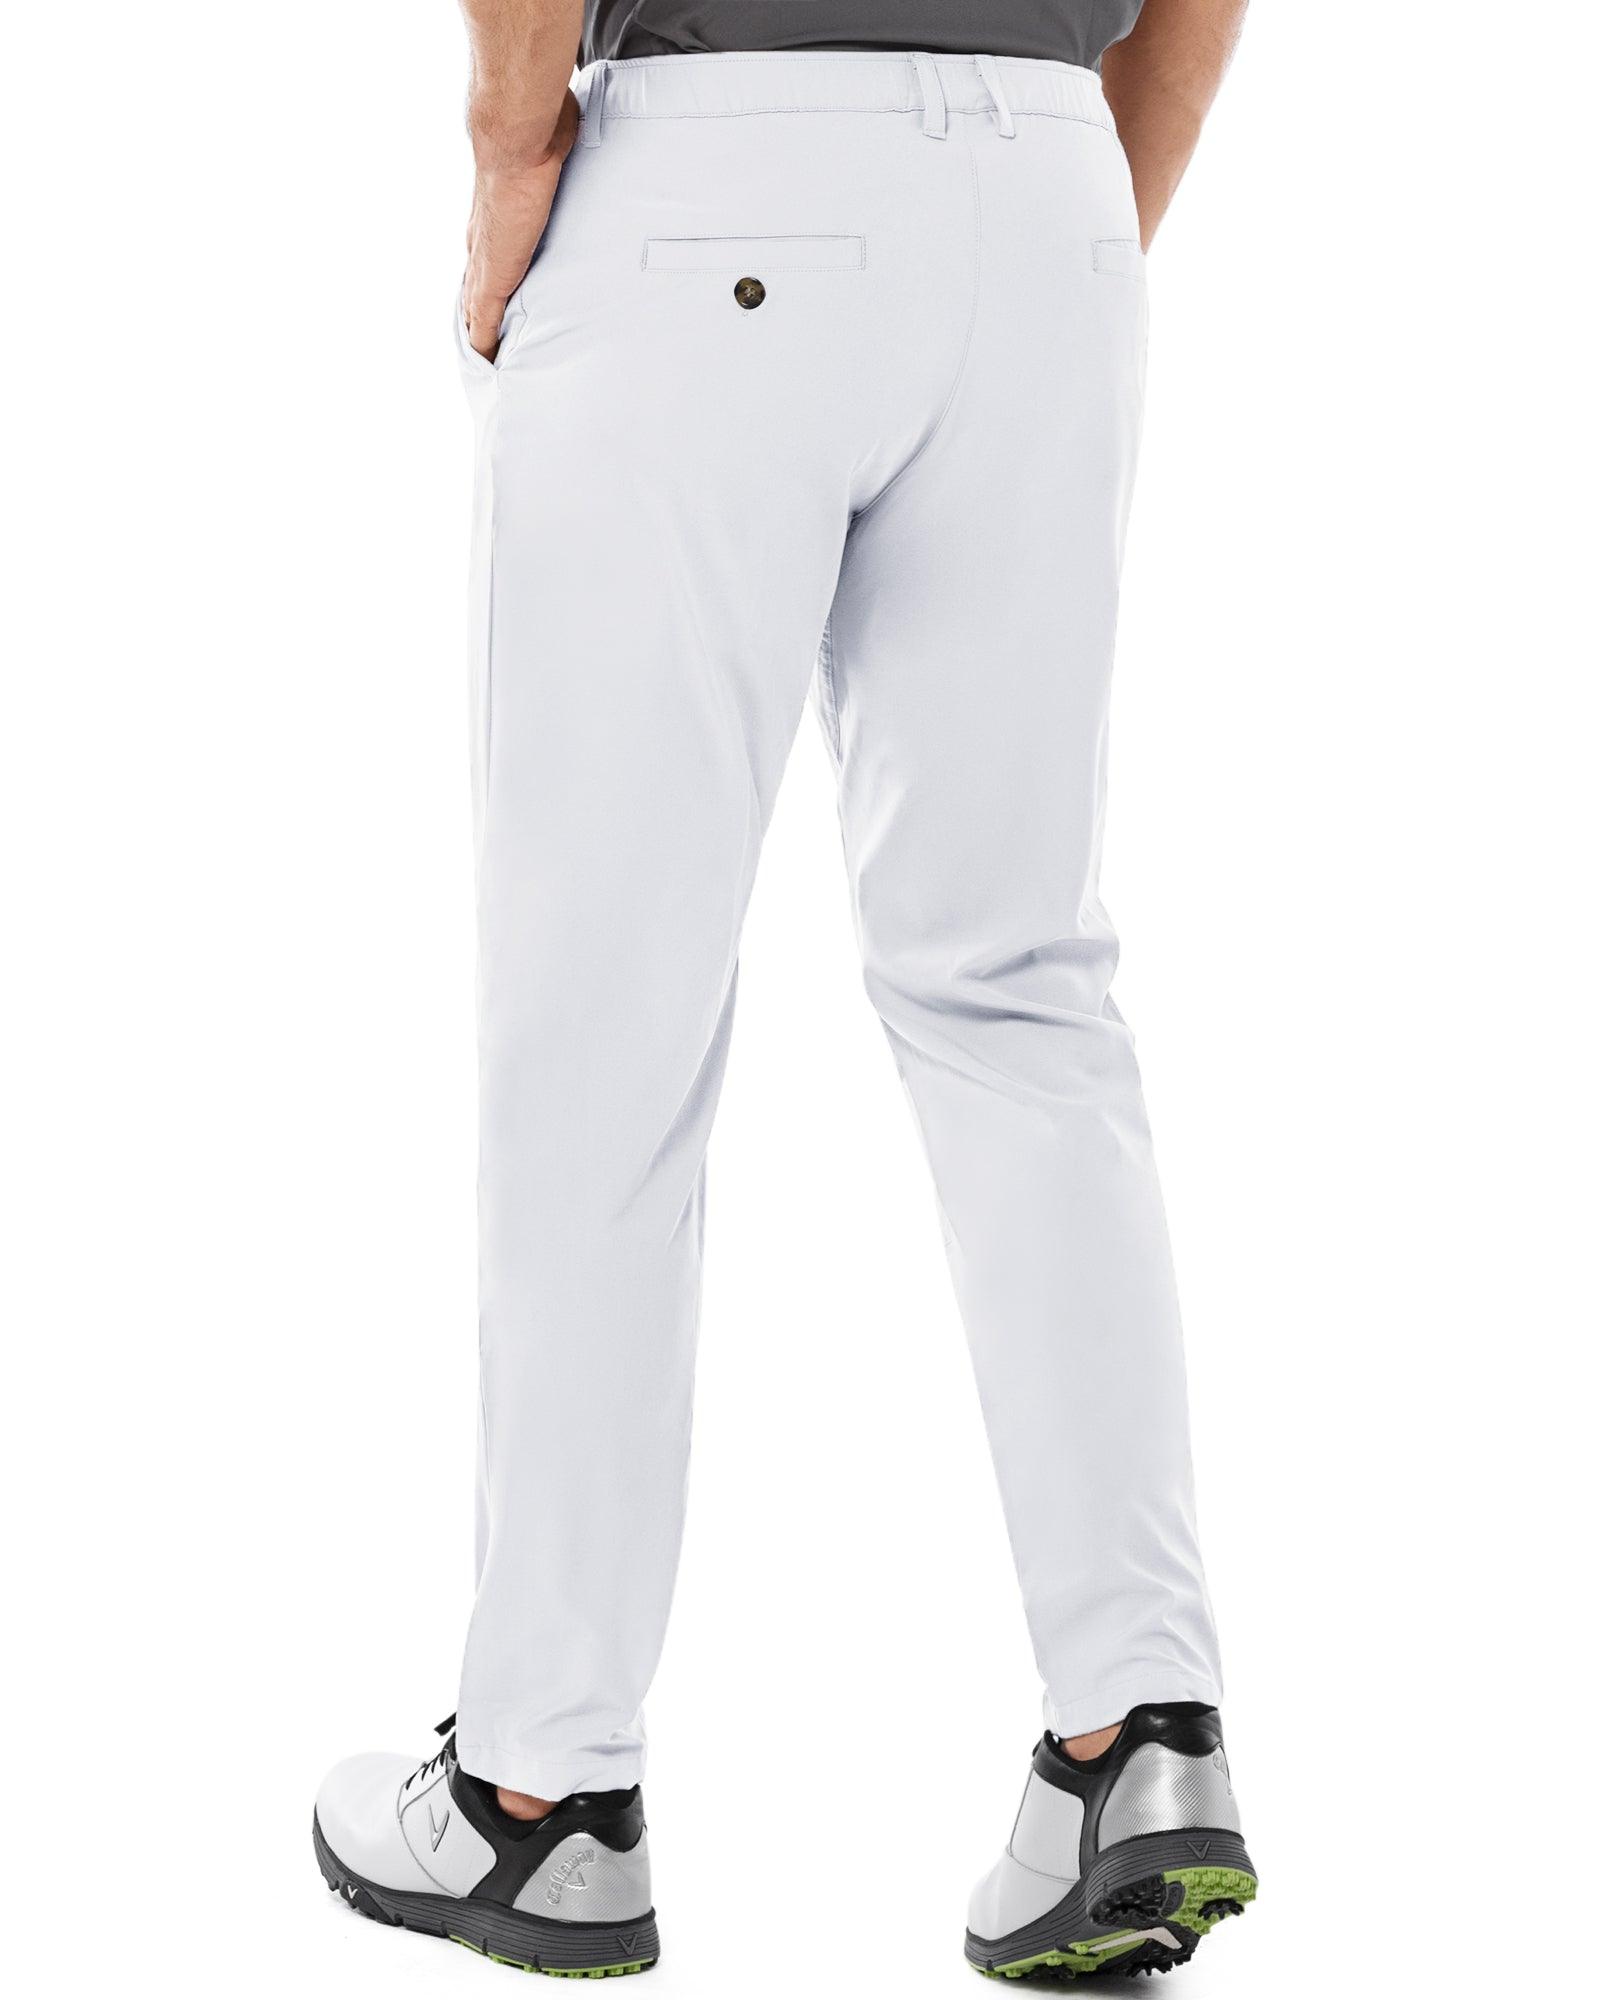 33,000ft Women's Capri Golf Pants Casual Quick Dry UPF 50+ Lightweight  Stretch Cargo Hiking Pants with Pockets Grey 8 